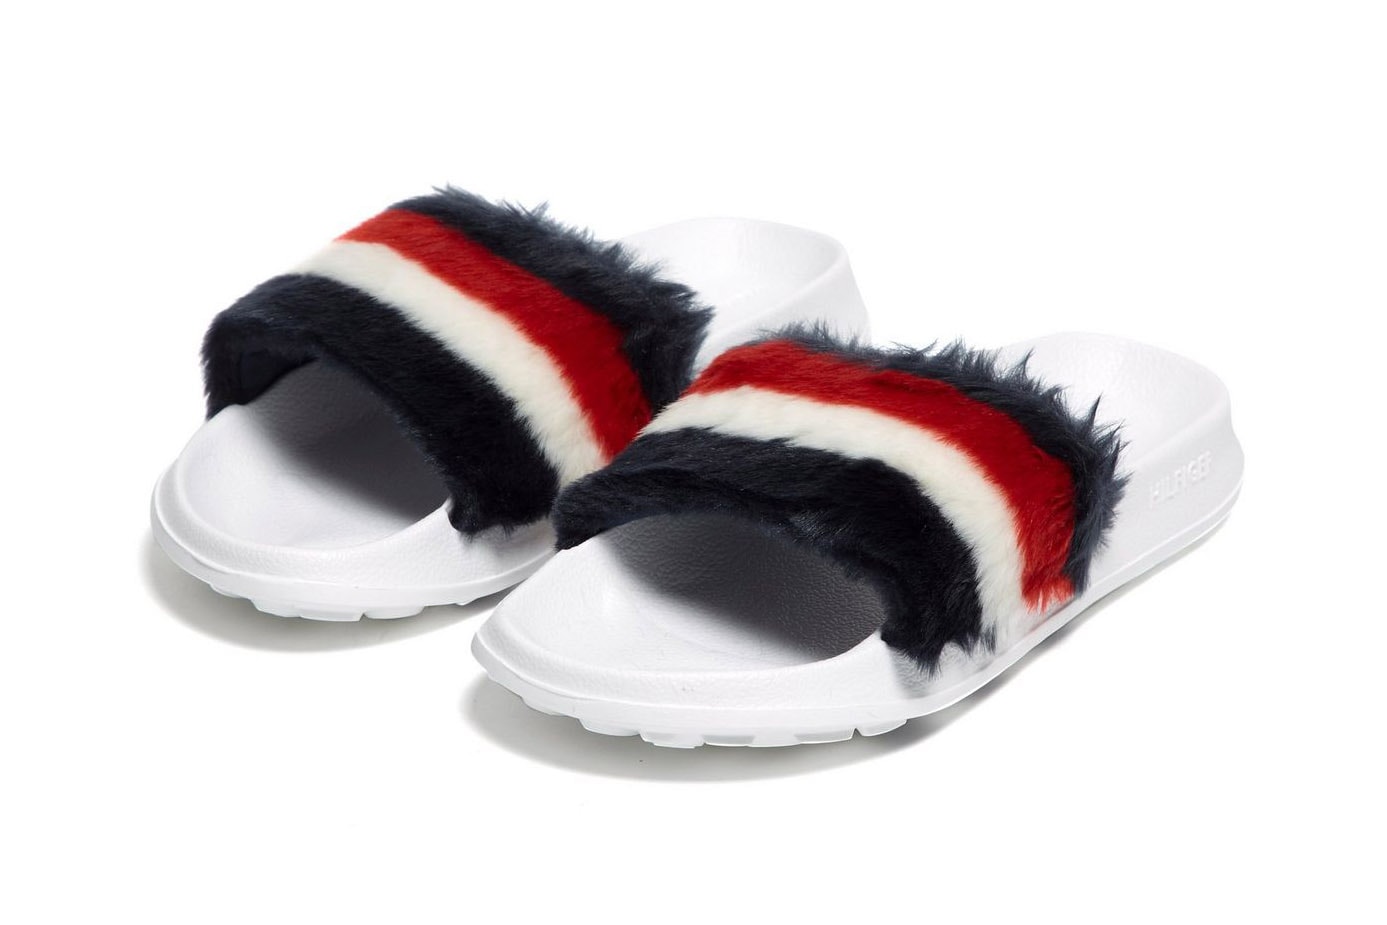 Tommy Hilfiger fluffy furry fuzzy mae lo slides sandals slip-ons summer footwear where to buy JD Sports